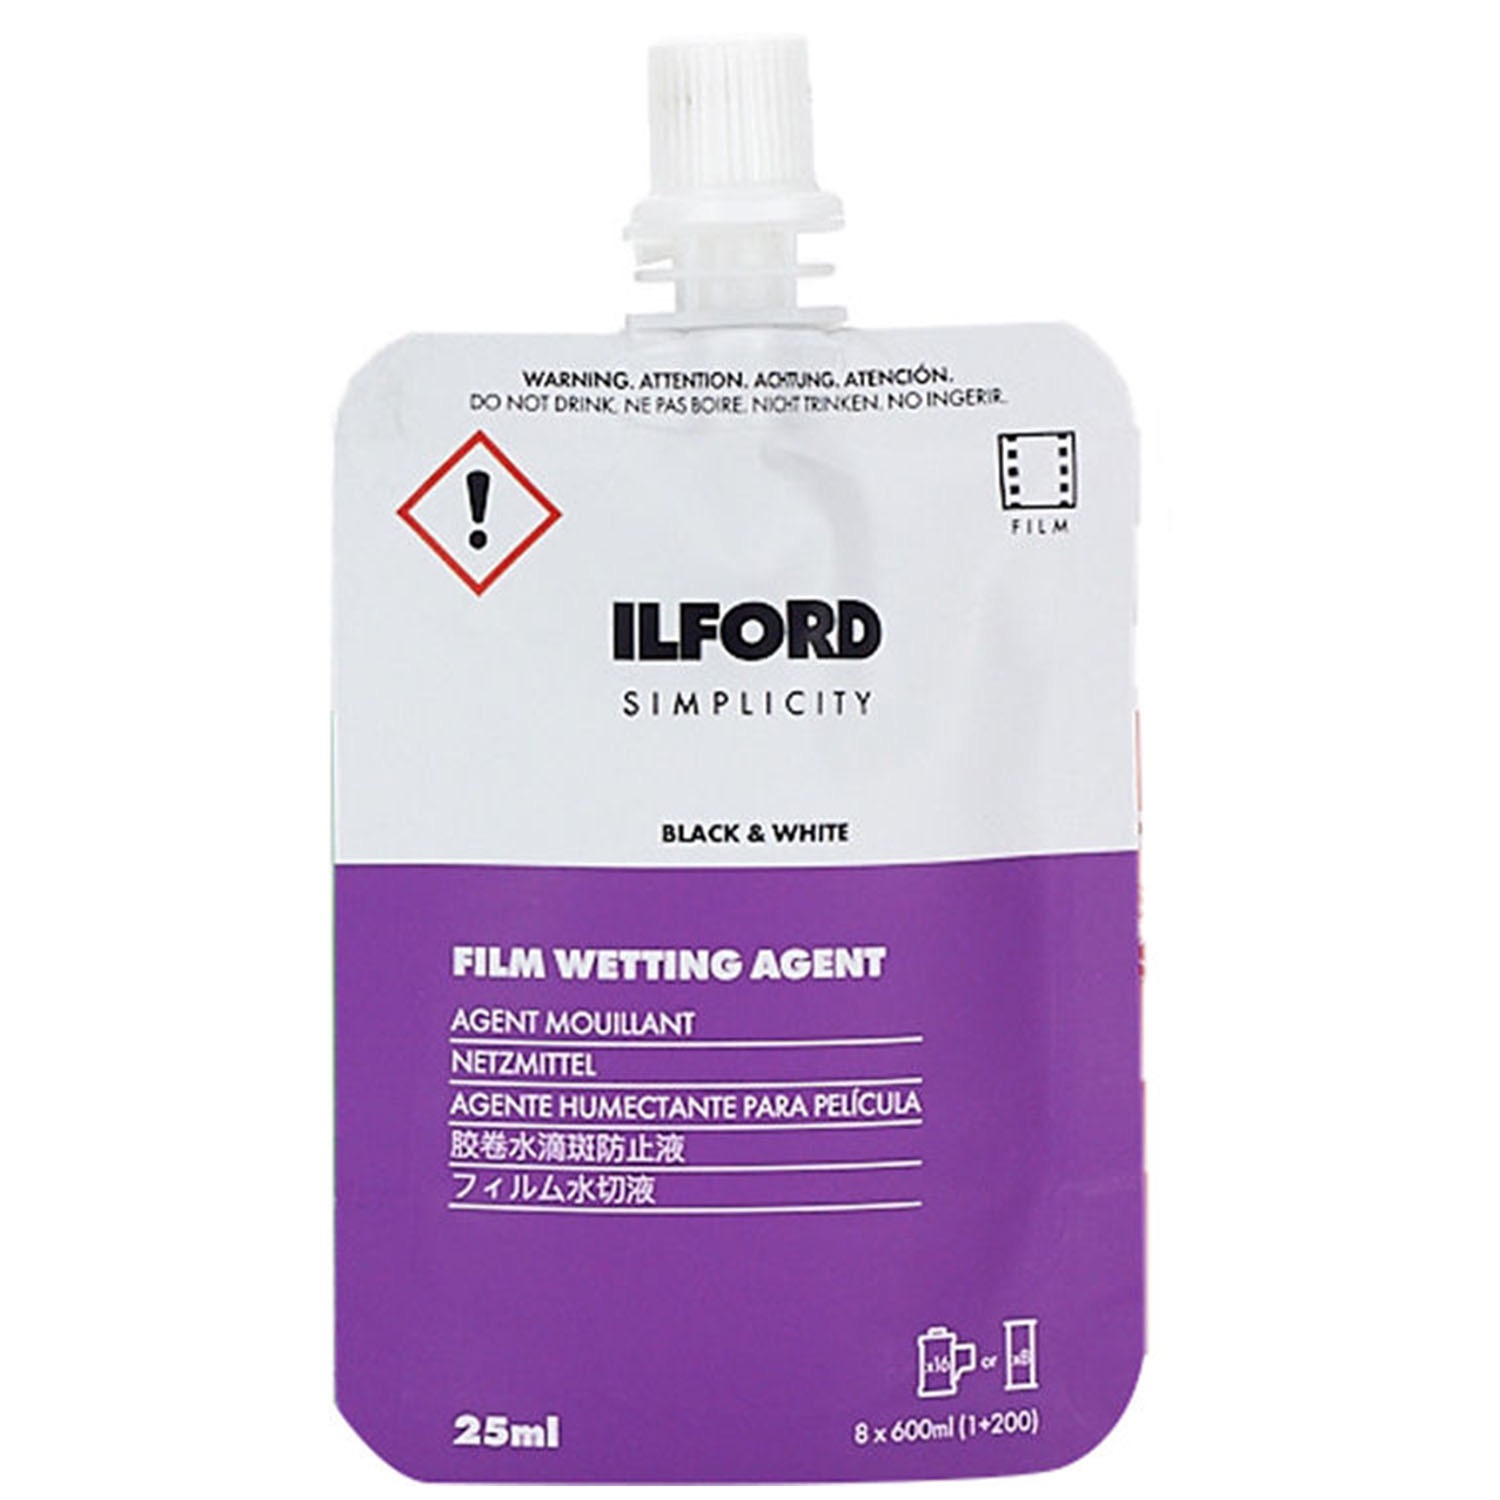 Ilford Simple Film Wetting Agent